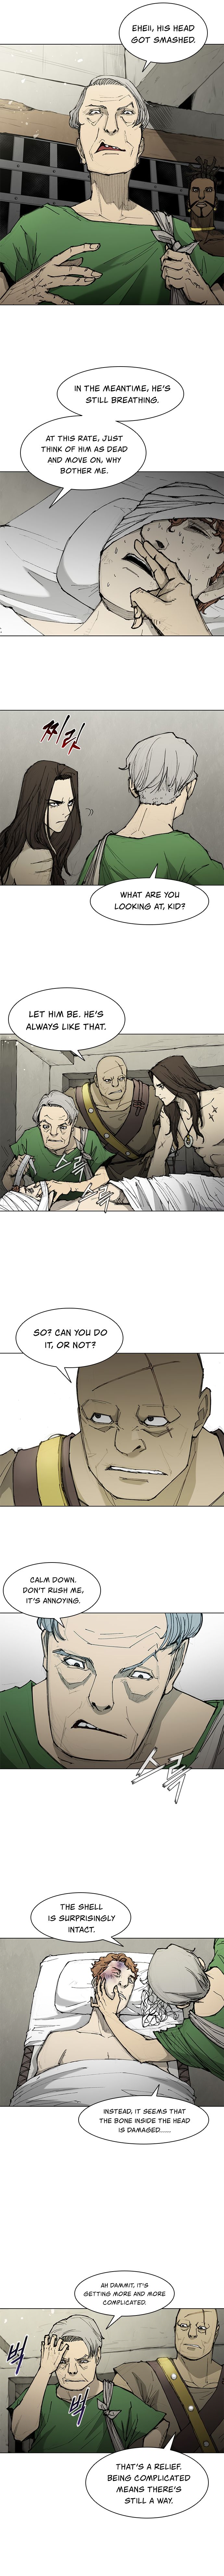 Long Way of the Warrior - Chapter 46 Page 2